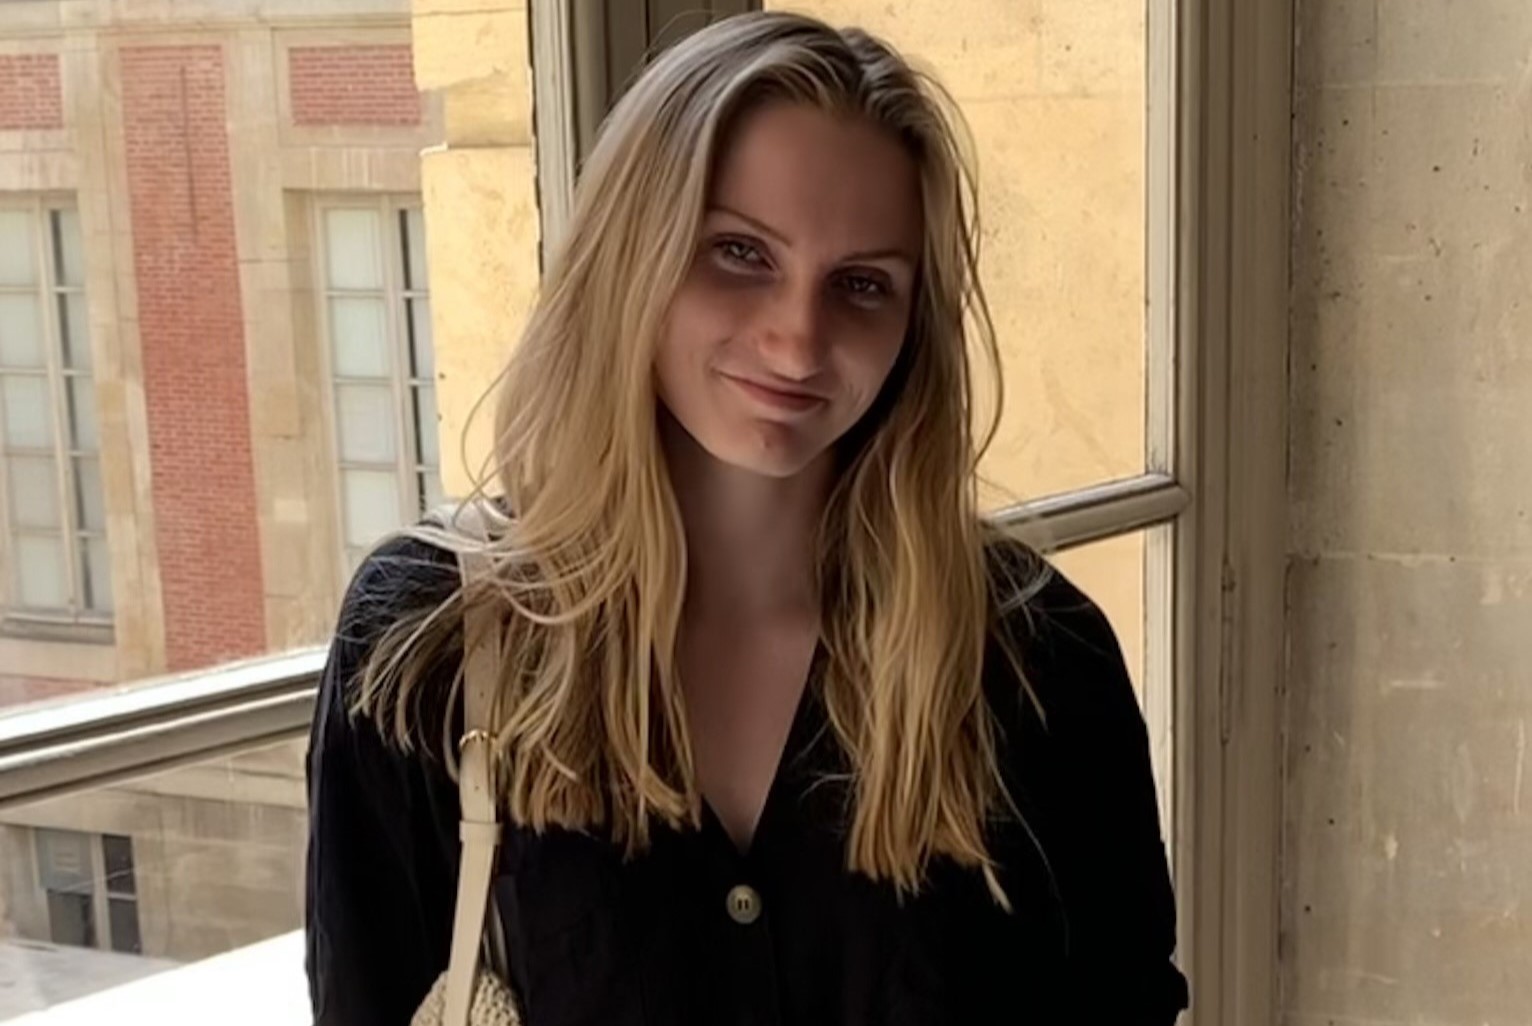 Photo of Jenna Wainwright in front of a window. She is wearing a black shirt with buttons and jeans, with a white bag around her right shoulder.